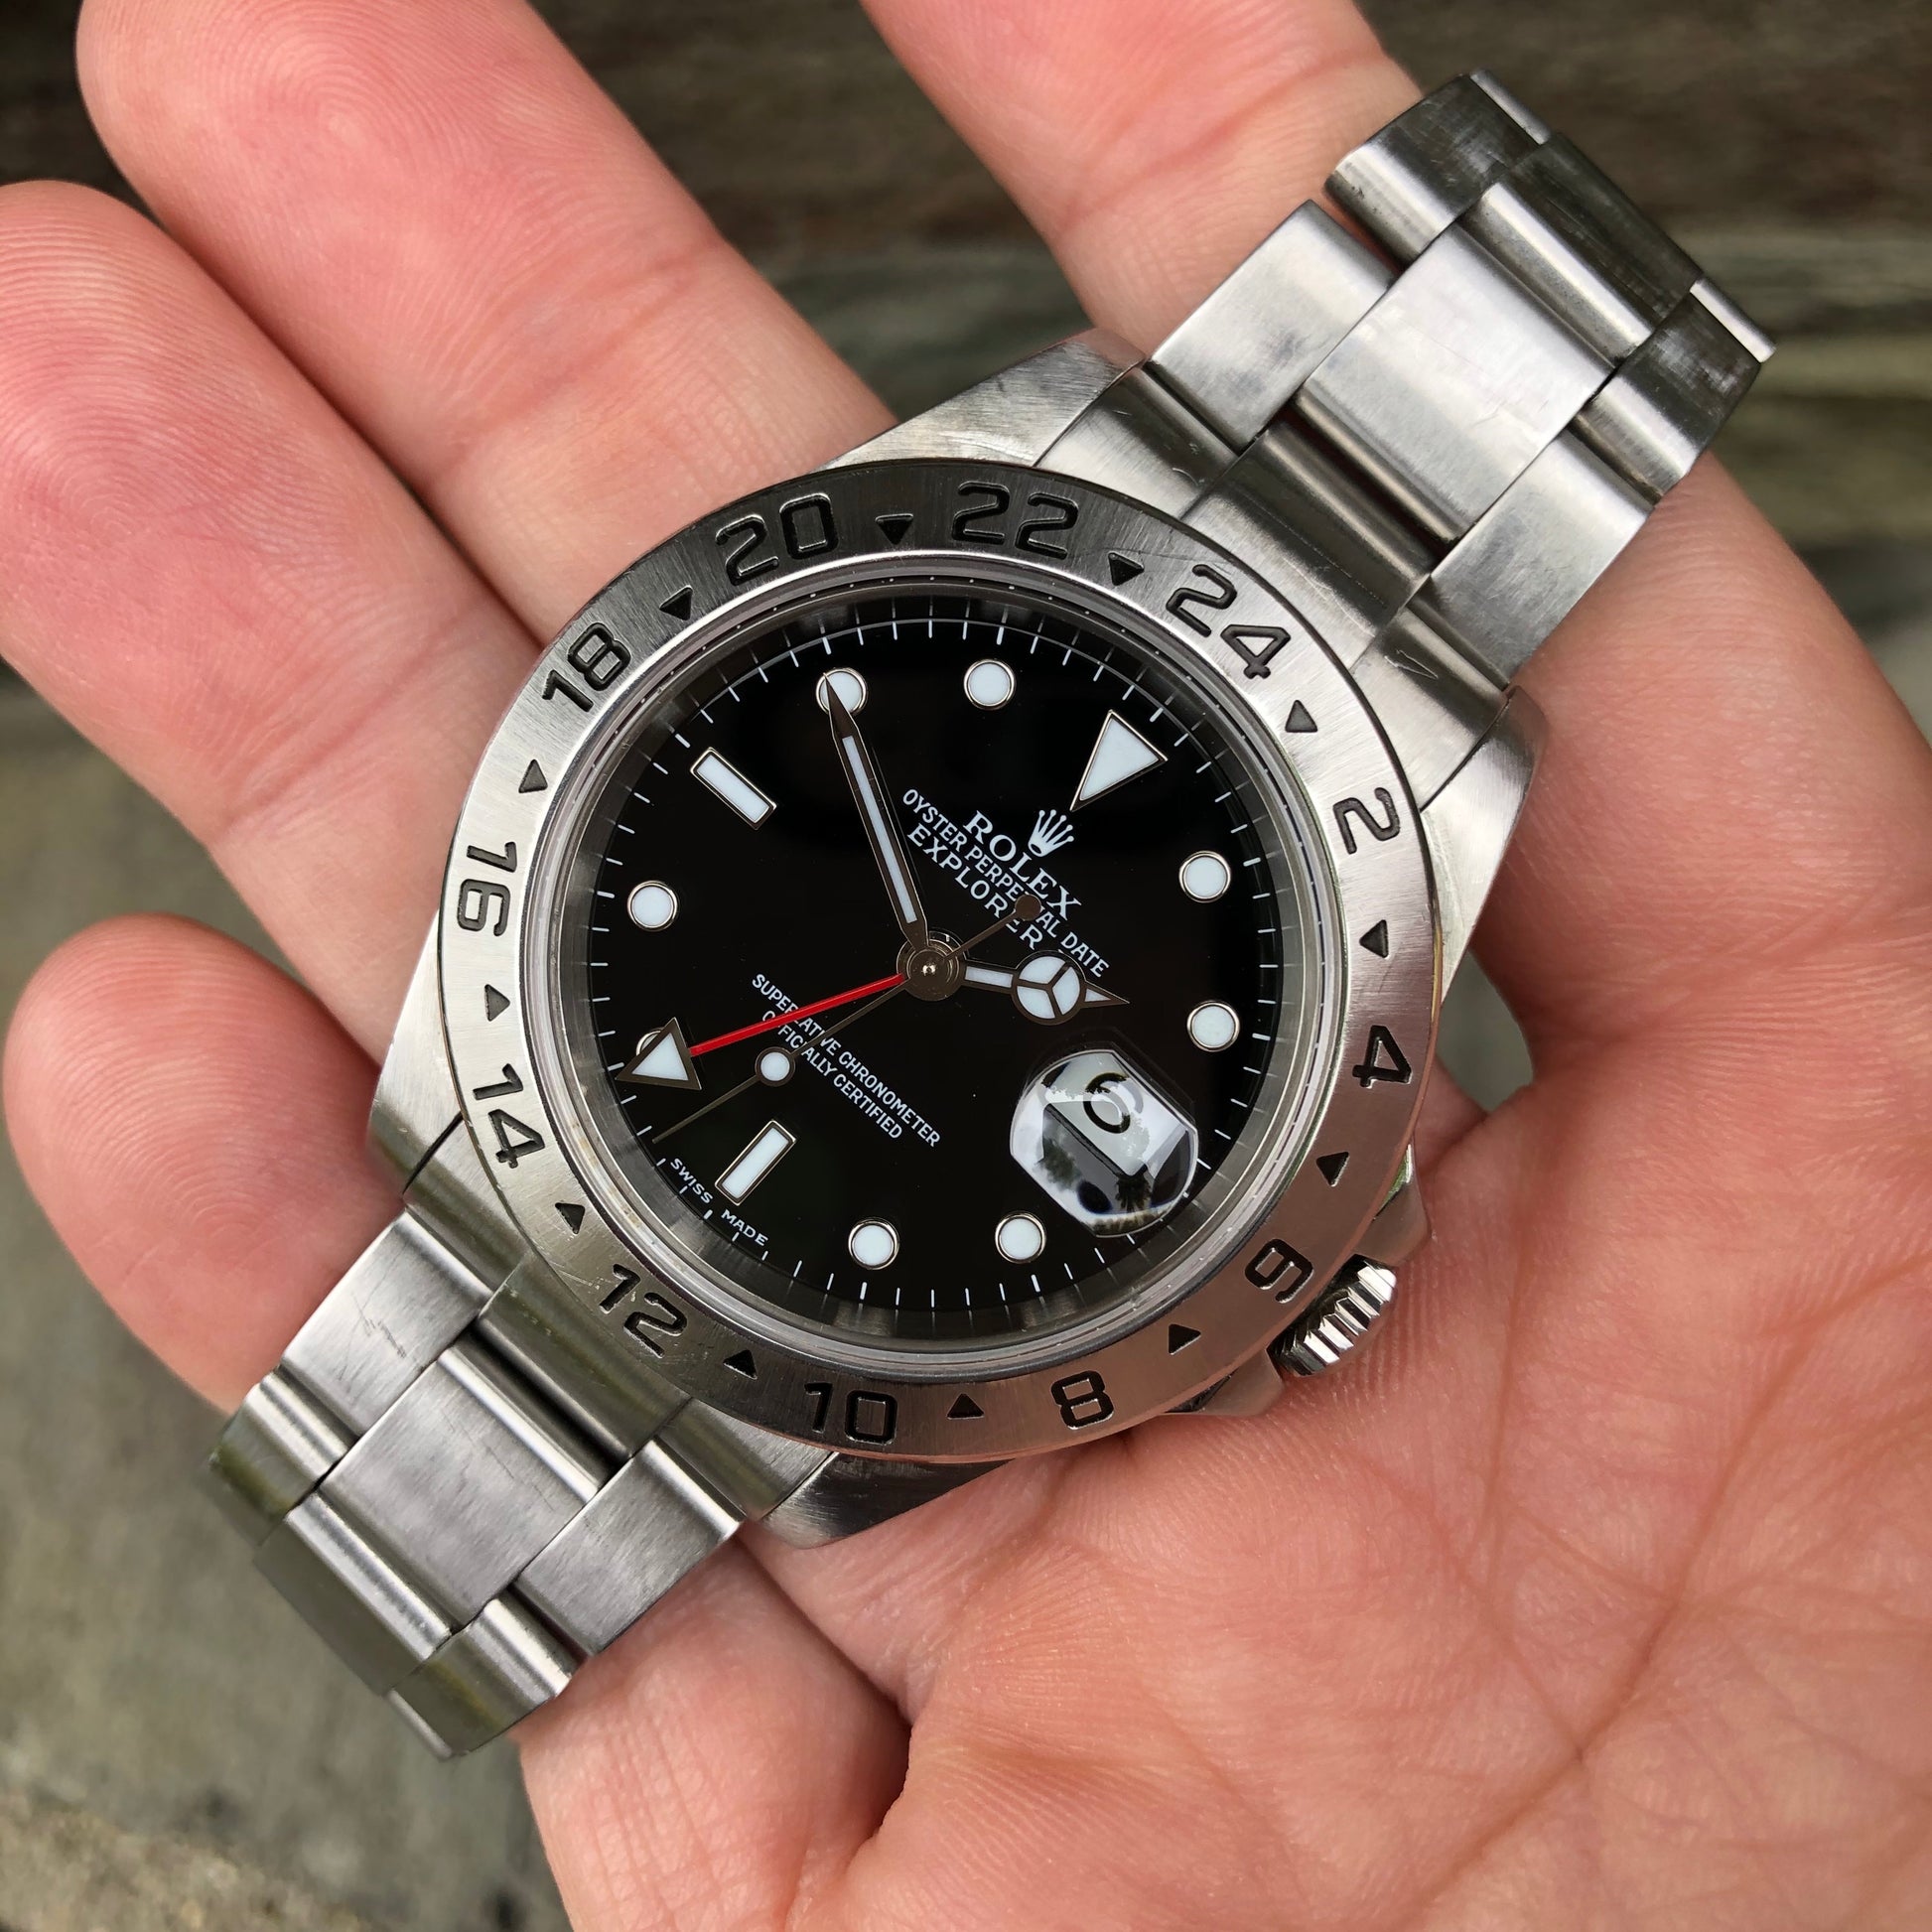 Rolex Explorer II 16570 Black Stainless Steel GMT Oyster Wristwatch Circa 2003 - Hashtag Watch Company